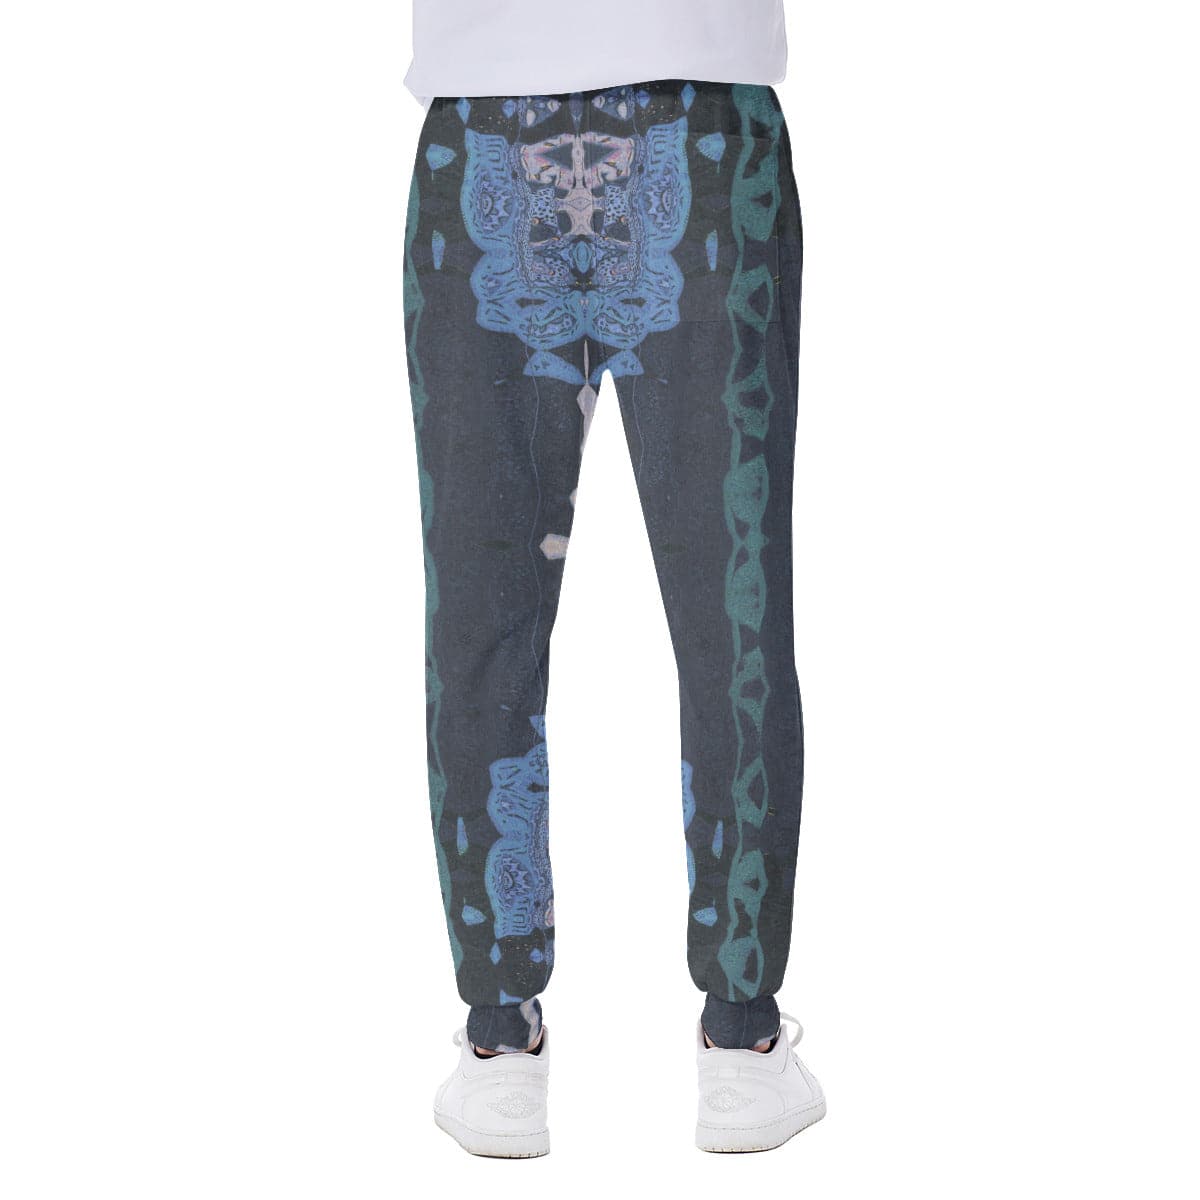 Blue in Blue Fantasy Patterned Men's  Sports and activity Sweatpants, by Sensus Studio Design